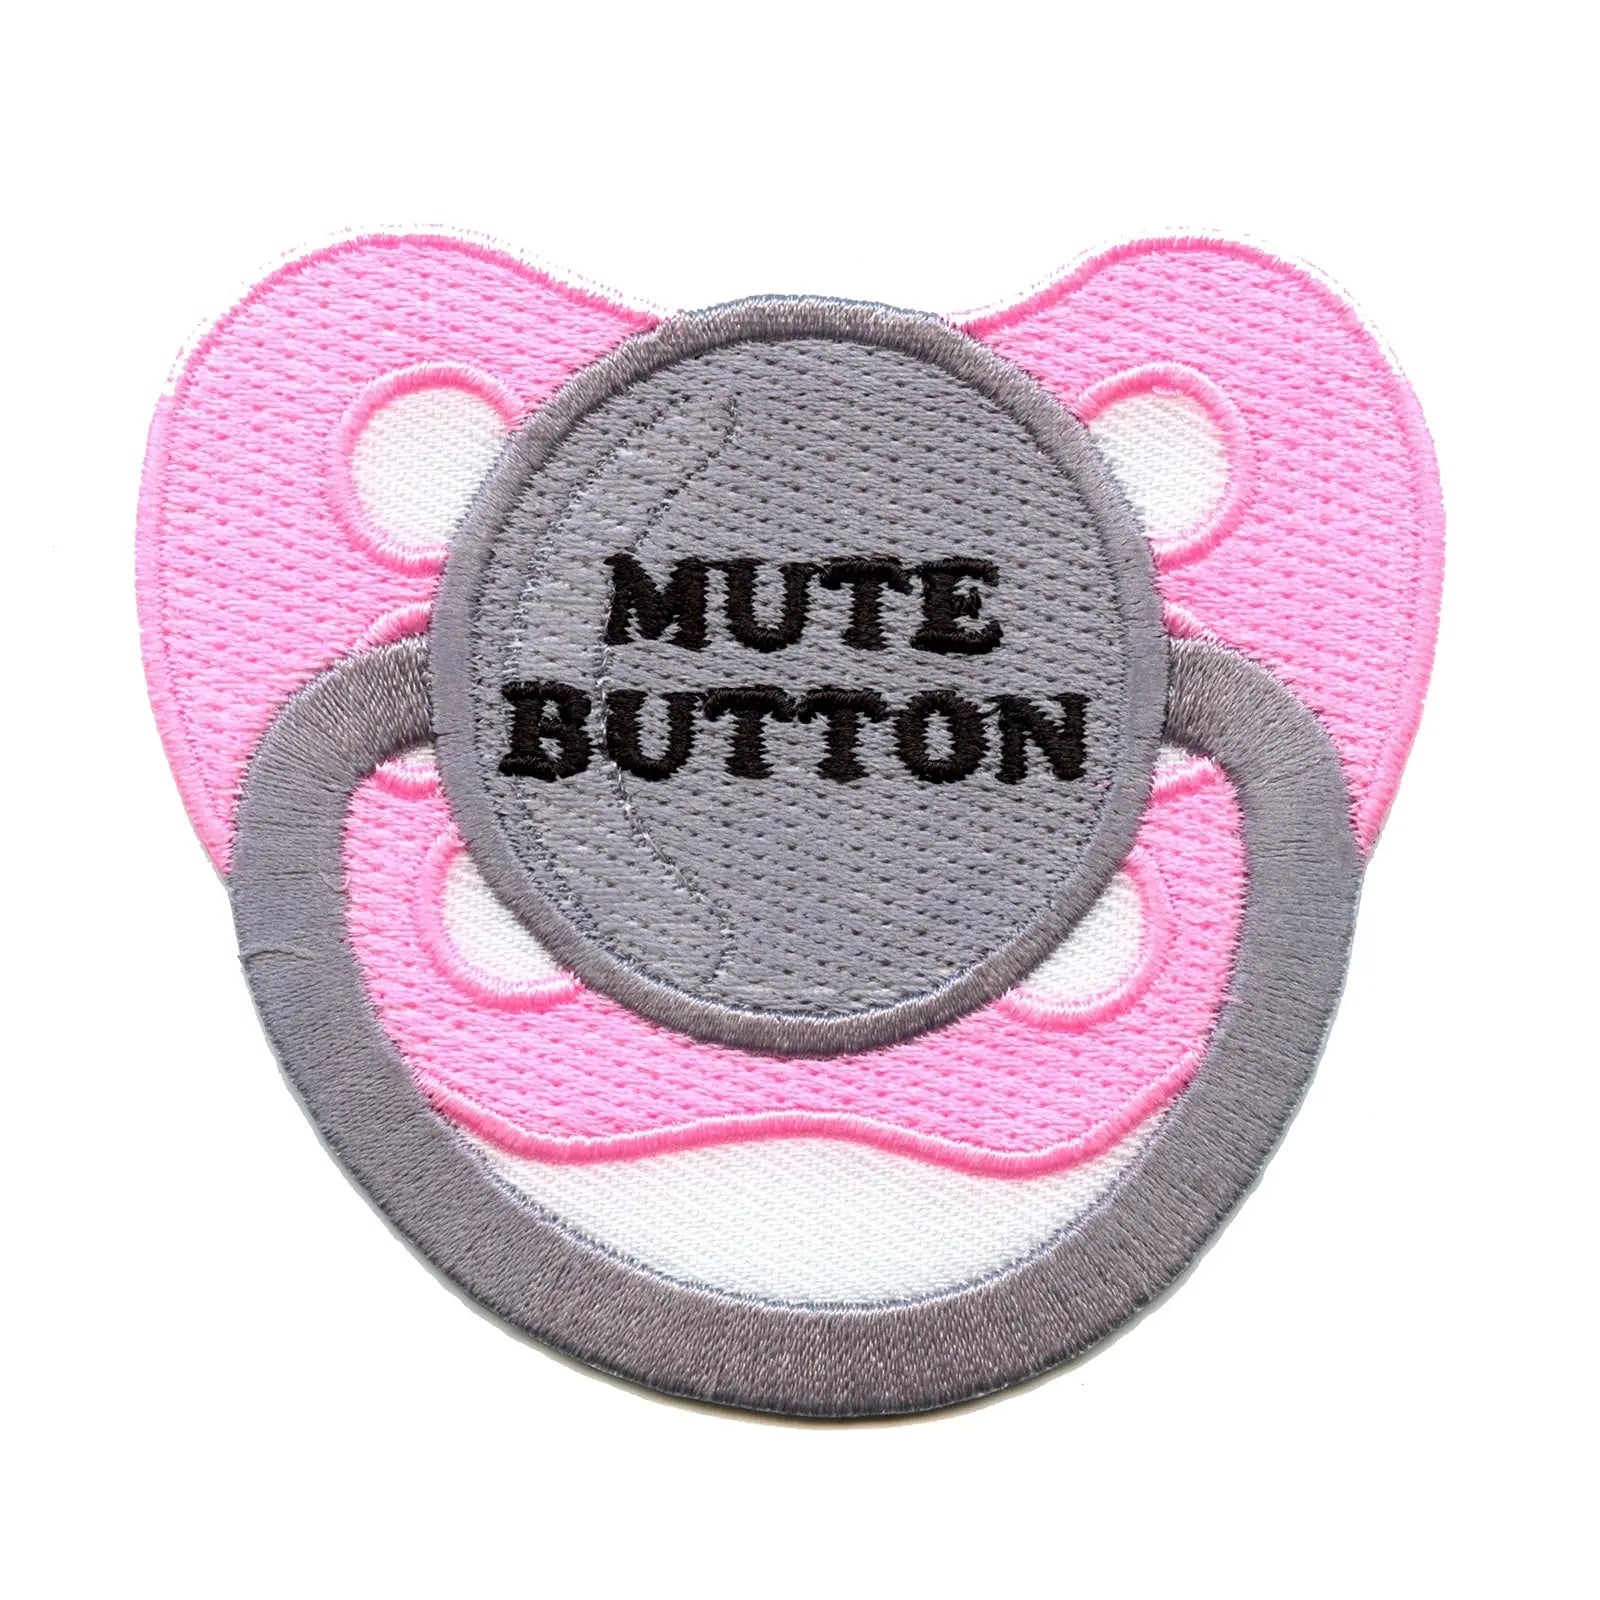 Pink Pacifier Mute Button Embroidered Iron-on Patch 